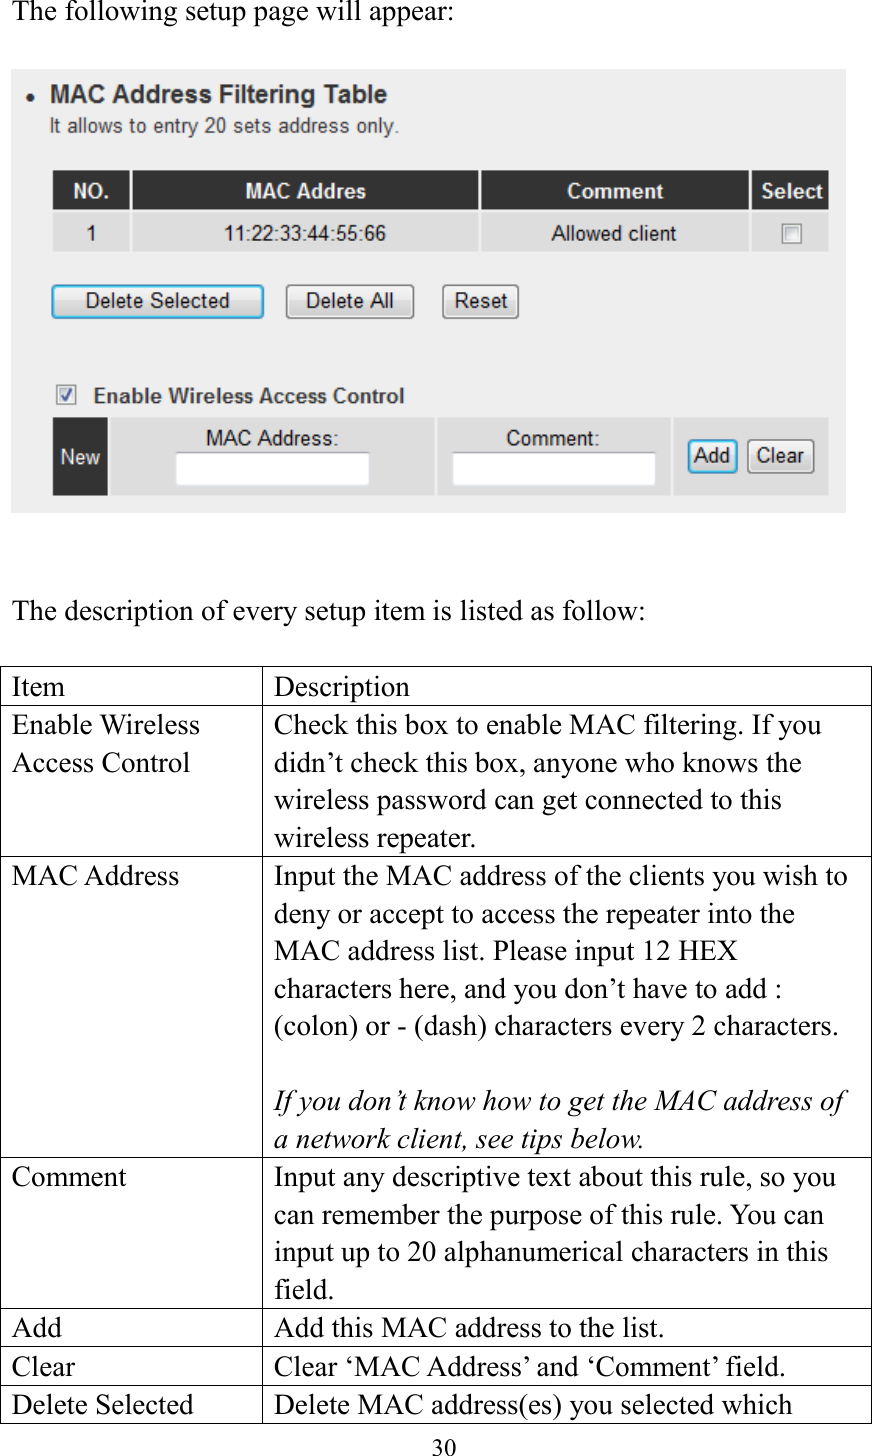  30  The following setup page will appear:     The description of every setup item is listed as follow:  Item Description Enable Wireless Access Control Check this box to enable MAC filtering. If you didn’t check this box, anyone who knows the wireless password can get connected to this wireless repeater. MAC Address Input the MAC address of the clients you wish to deny or accept to access the repeater into the MAC address list. Please input 12 HEX characters here, and you don’t have to add : (colon) or - (dash) characters every 2 characters.  If you don’t know how to get the MAC address of a network client, see tips below. Comment Input any descriptive text about this rule, so you can remember the purpose of this rule. You can input up to 20 alphanumerical characters in this field. Add Add this MAC address to the list. Clear Clear ‘MAC Address’ and ‘Comment’ field. Delete Selected Delete MAC address(es) you selected which 